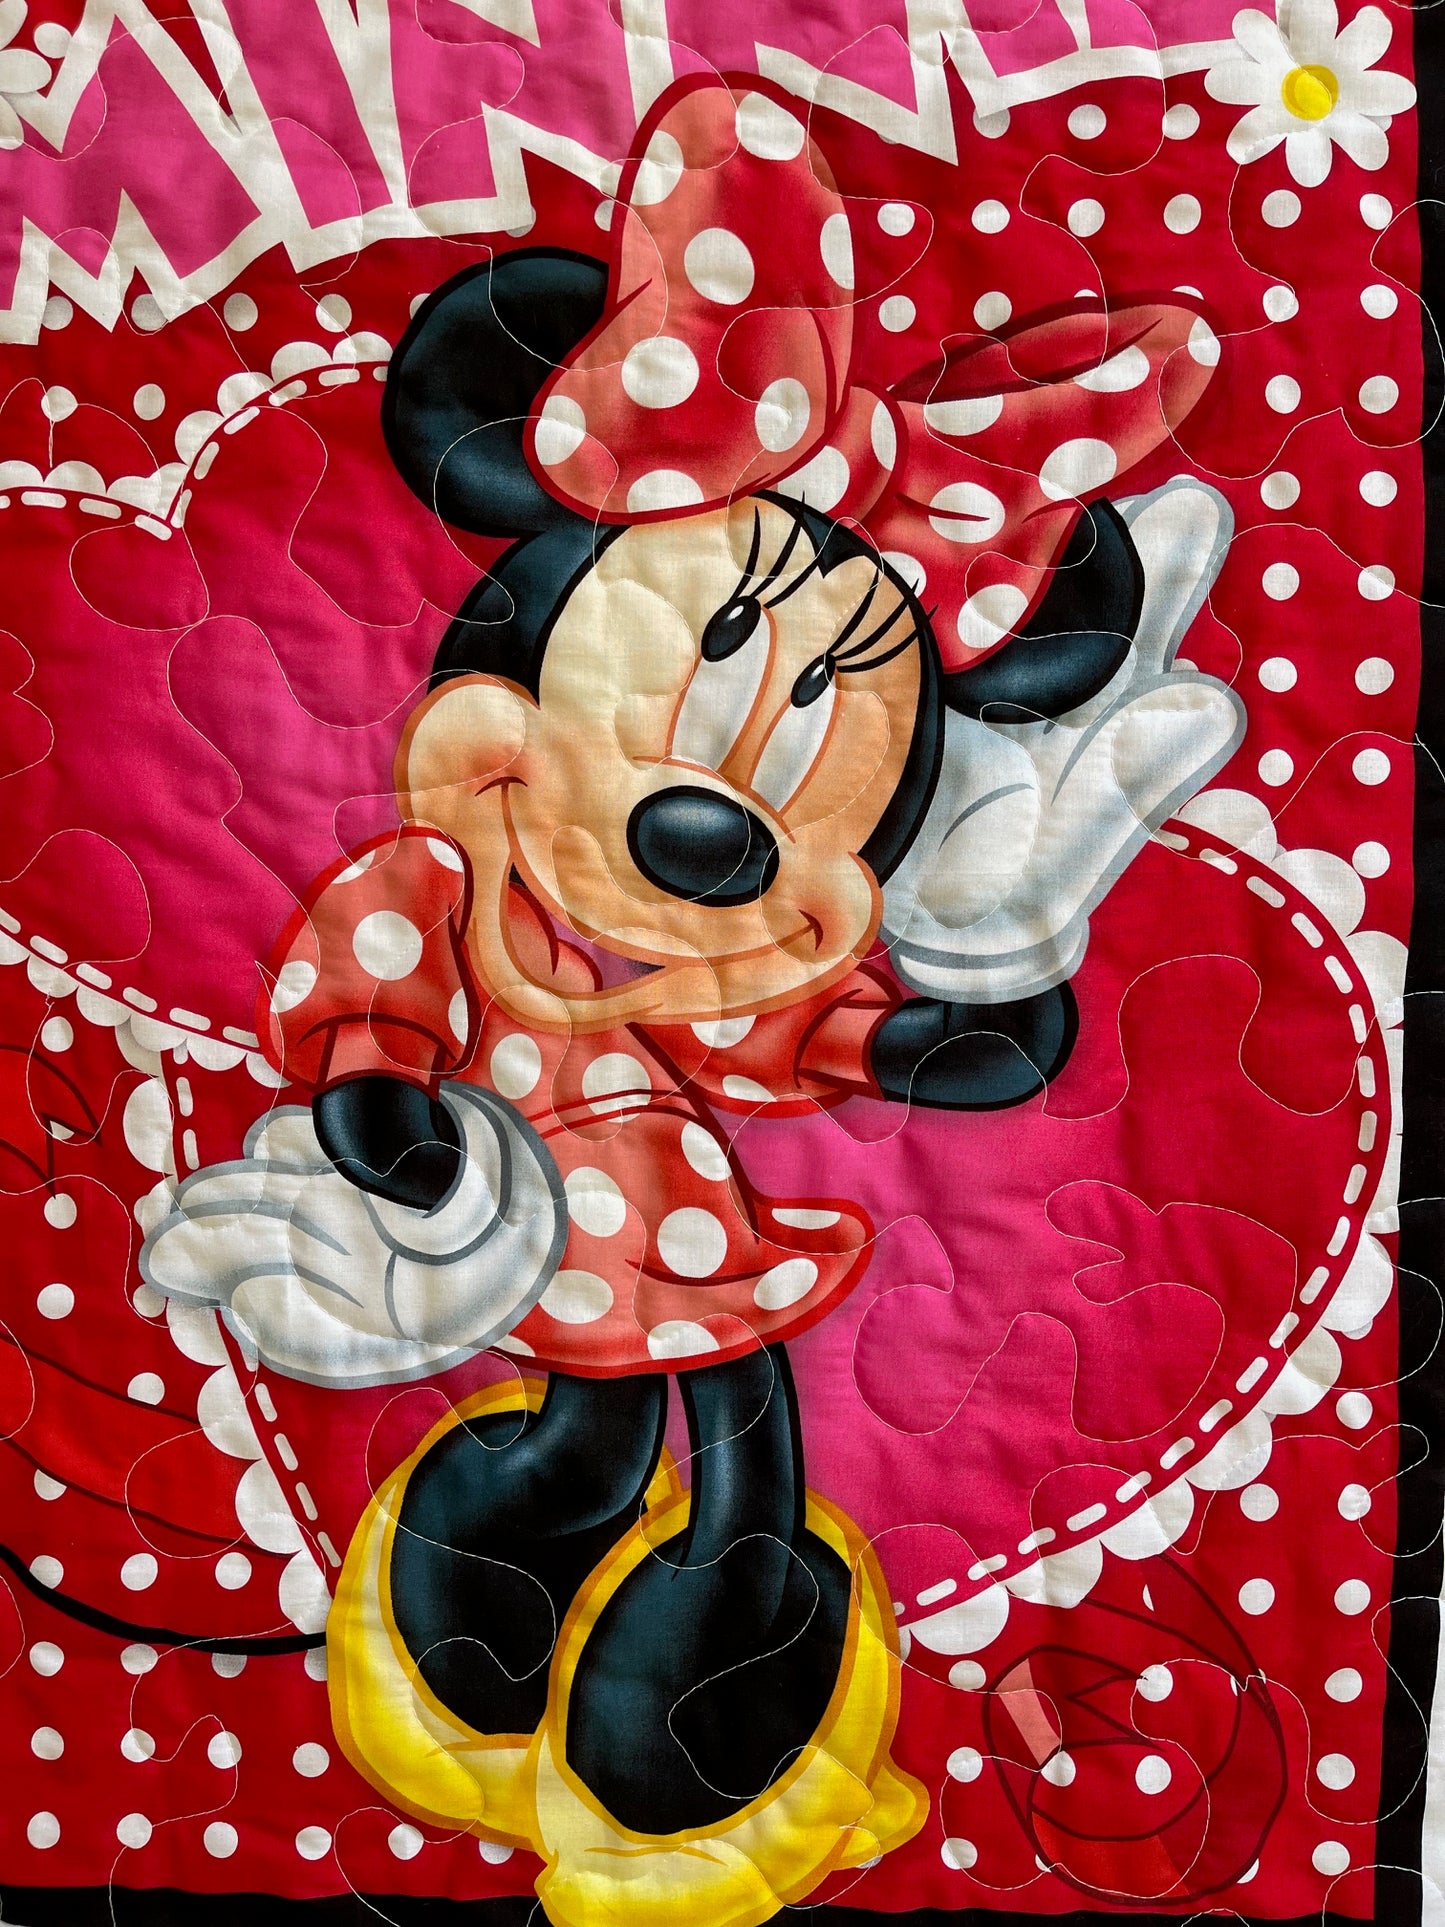 MINNIE MOUSE "LOVE MINNIE HEARTS" Inspired QUILTED BLANKET